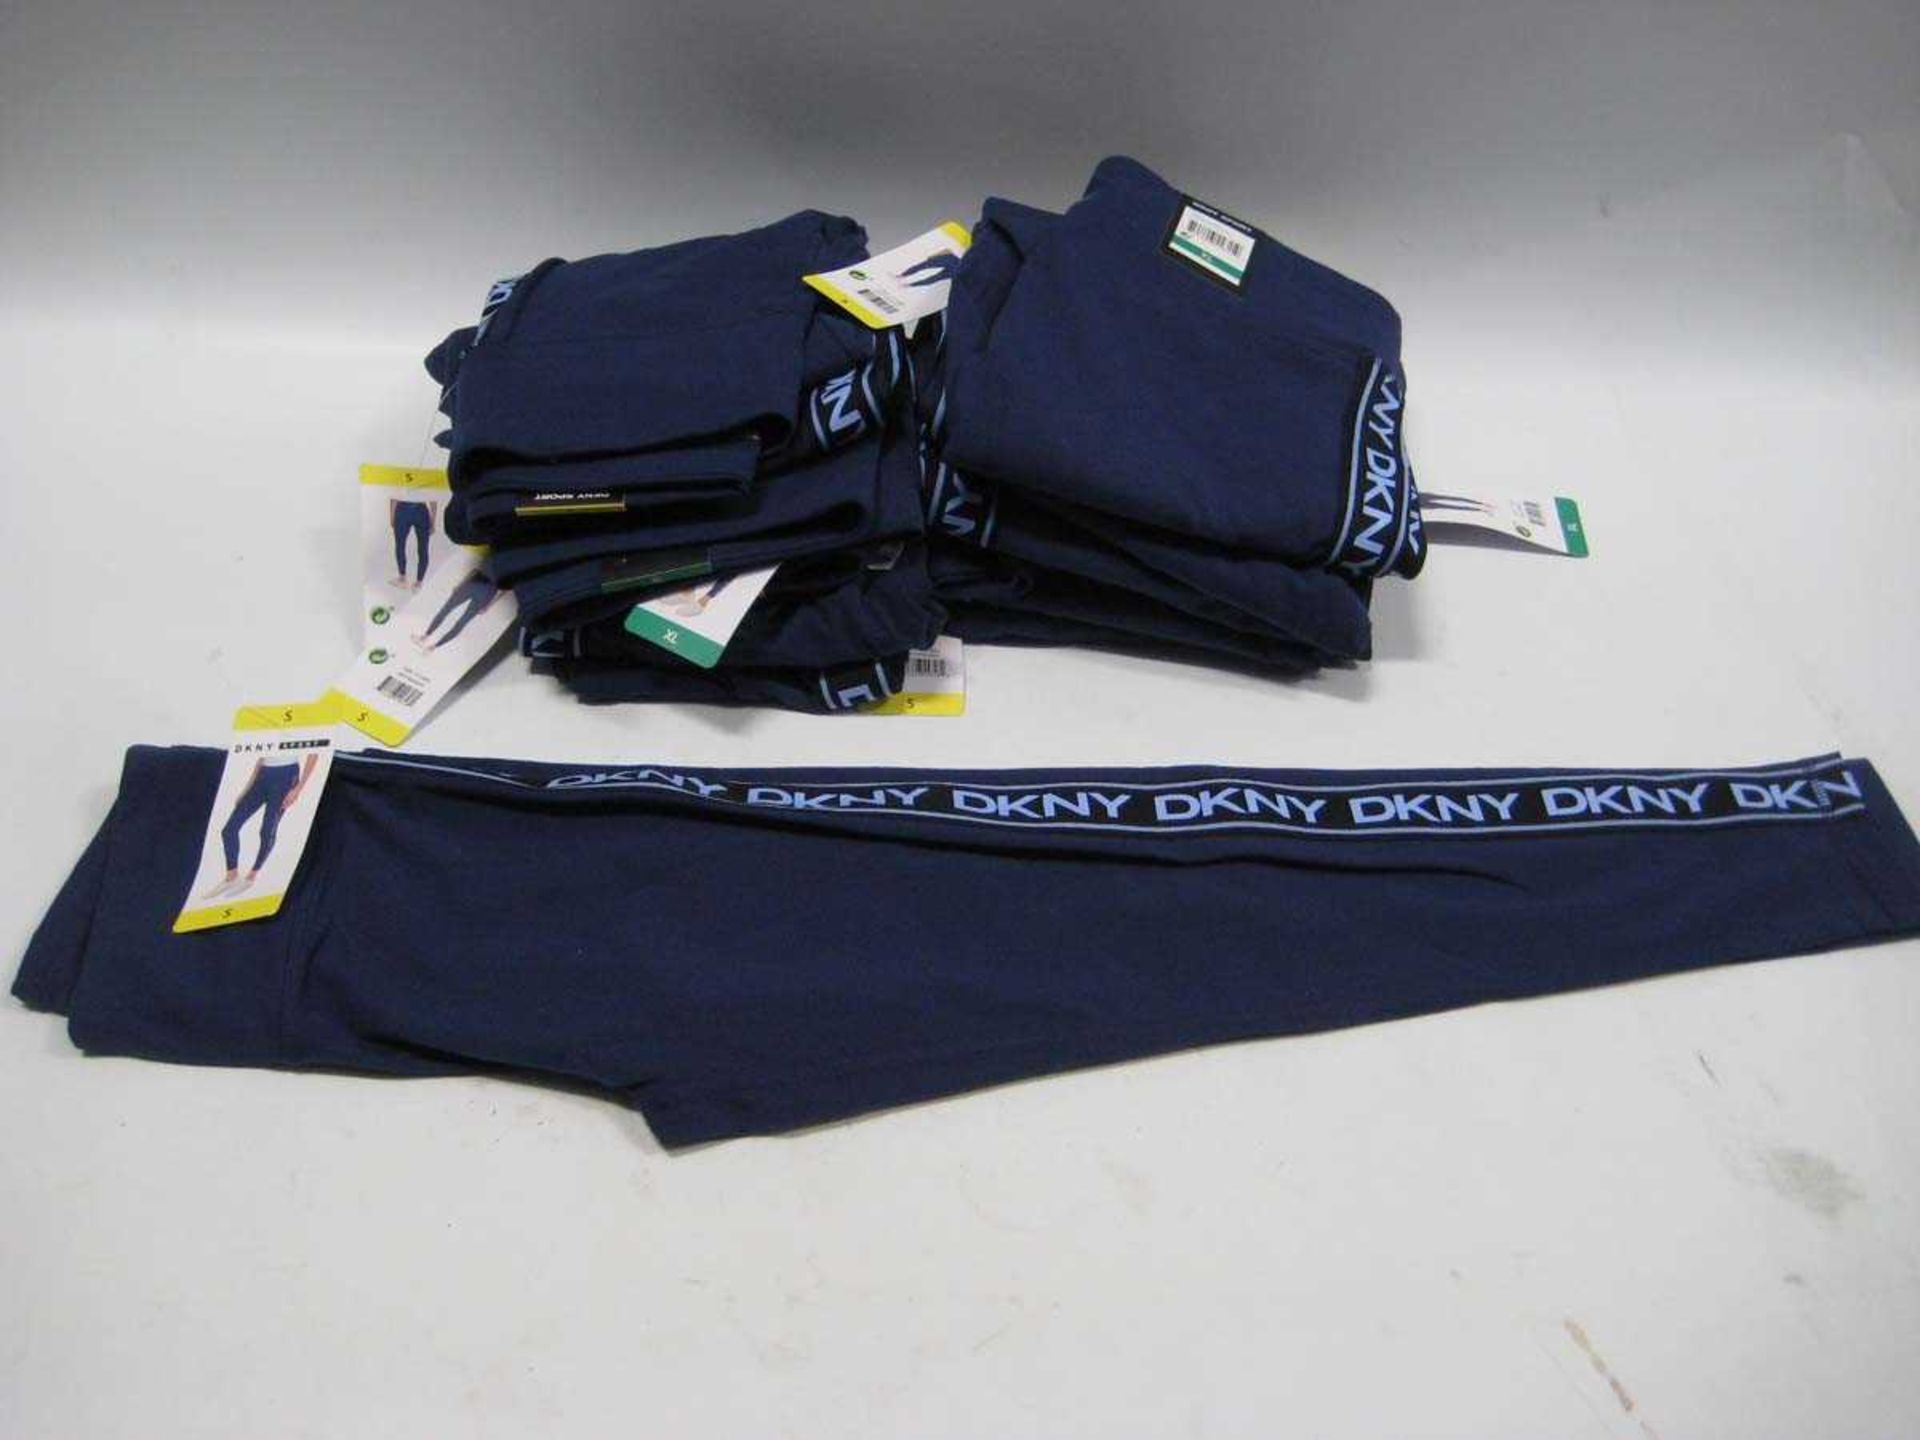 +VAT A bag containing 12x Ladies Navy DKNY Leggings in various sizes.